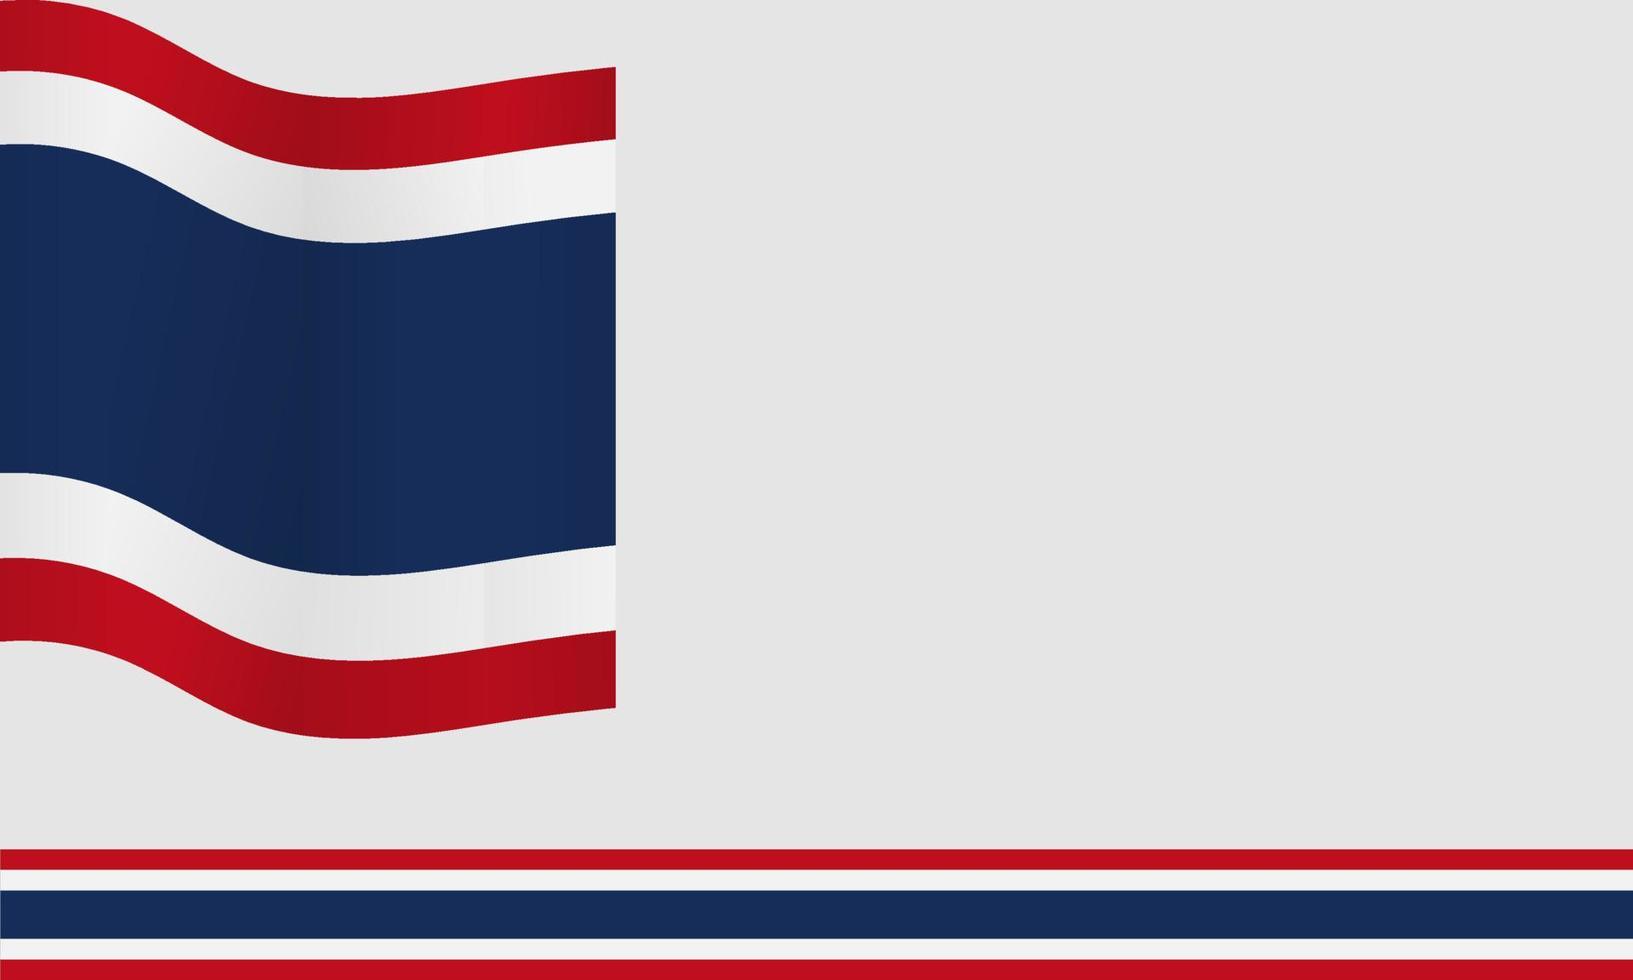 Thailand Constitution Day Background Vector Illustration, and Copy space area. Suitable to be placed on content with that theme. Thailand flag